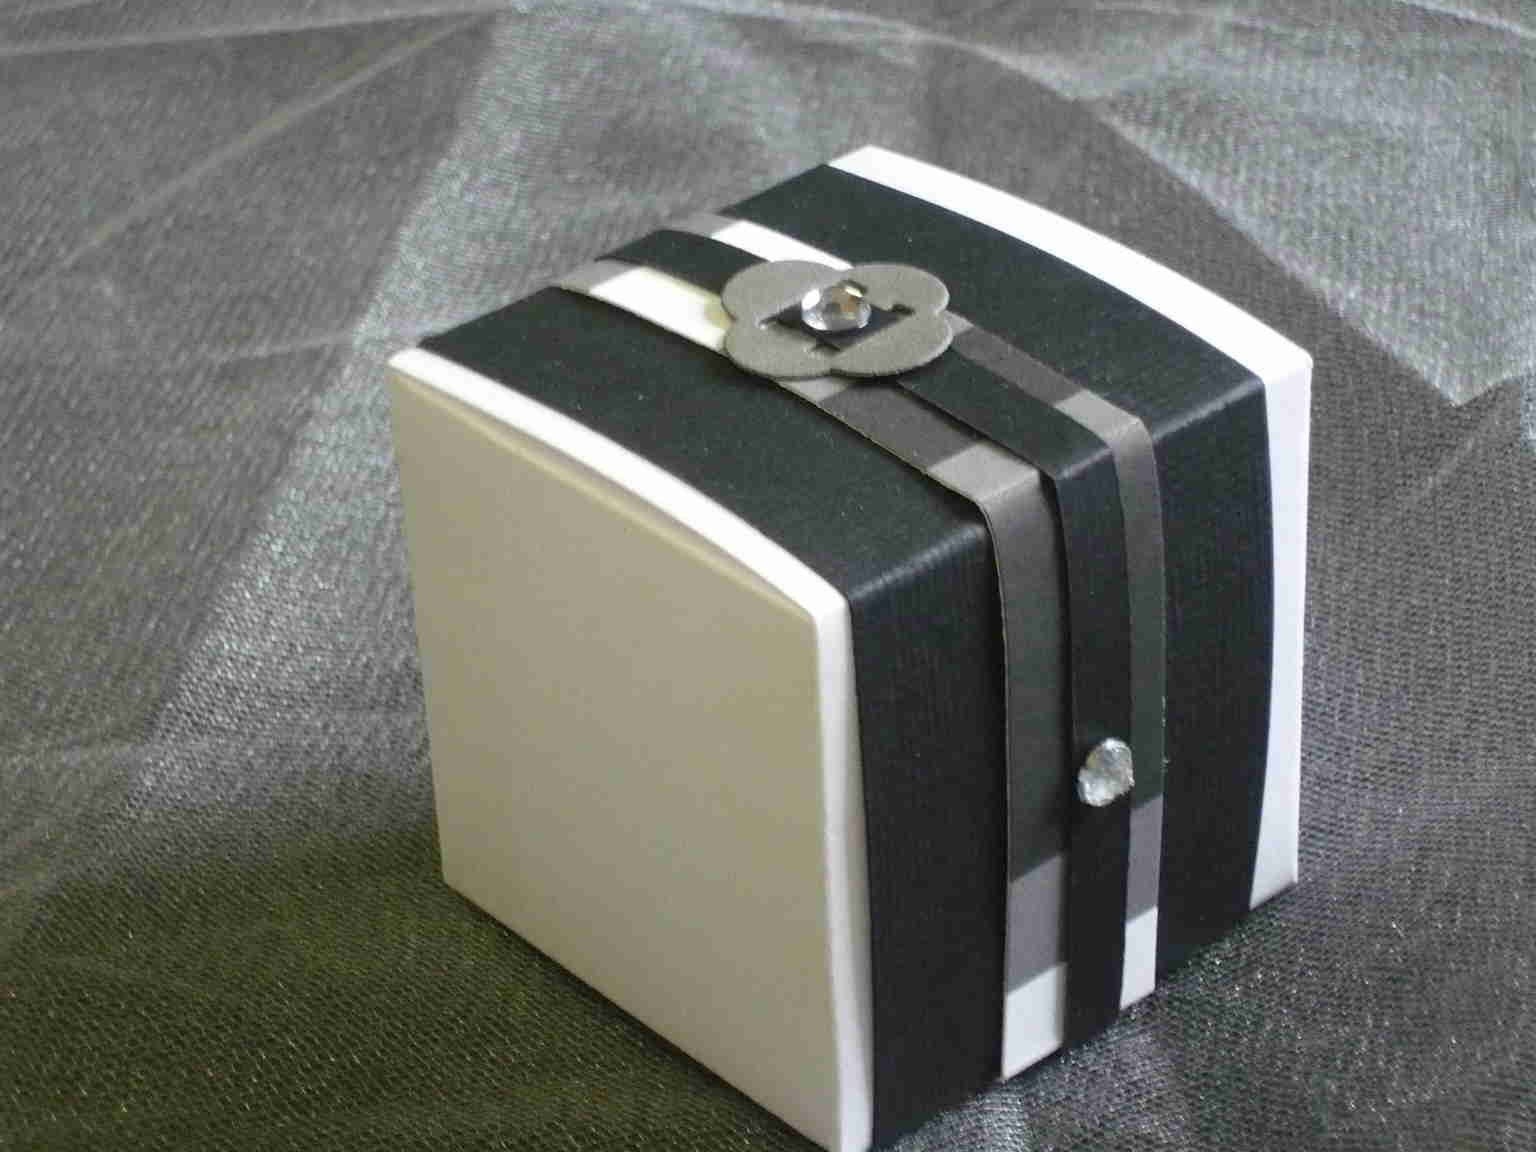 5 Black and Gray Favor Boxes